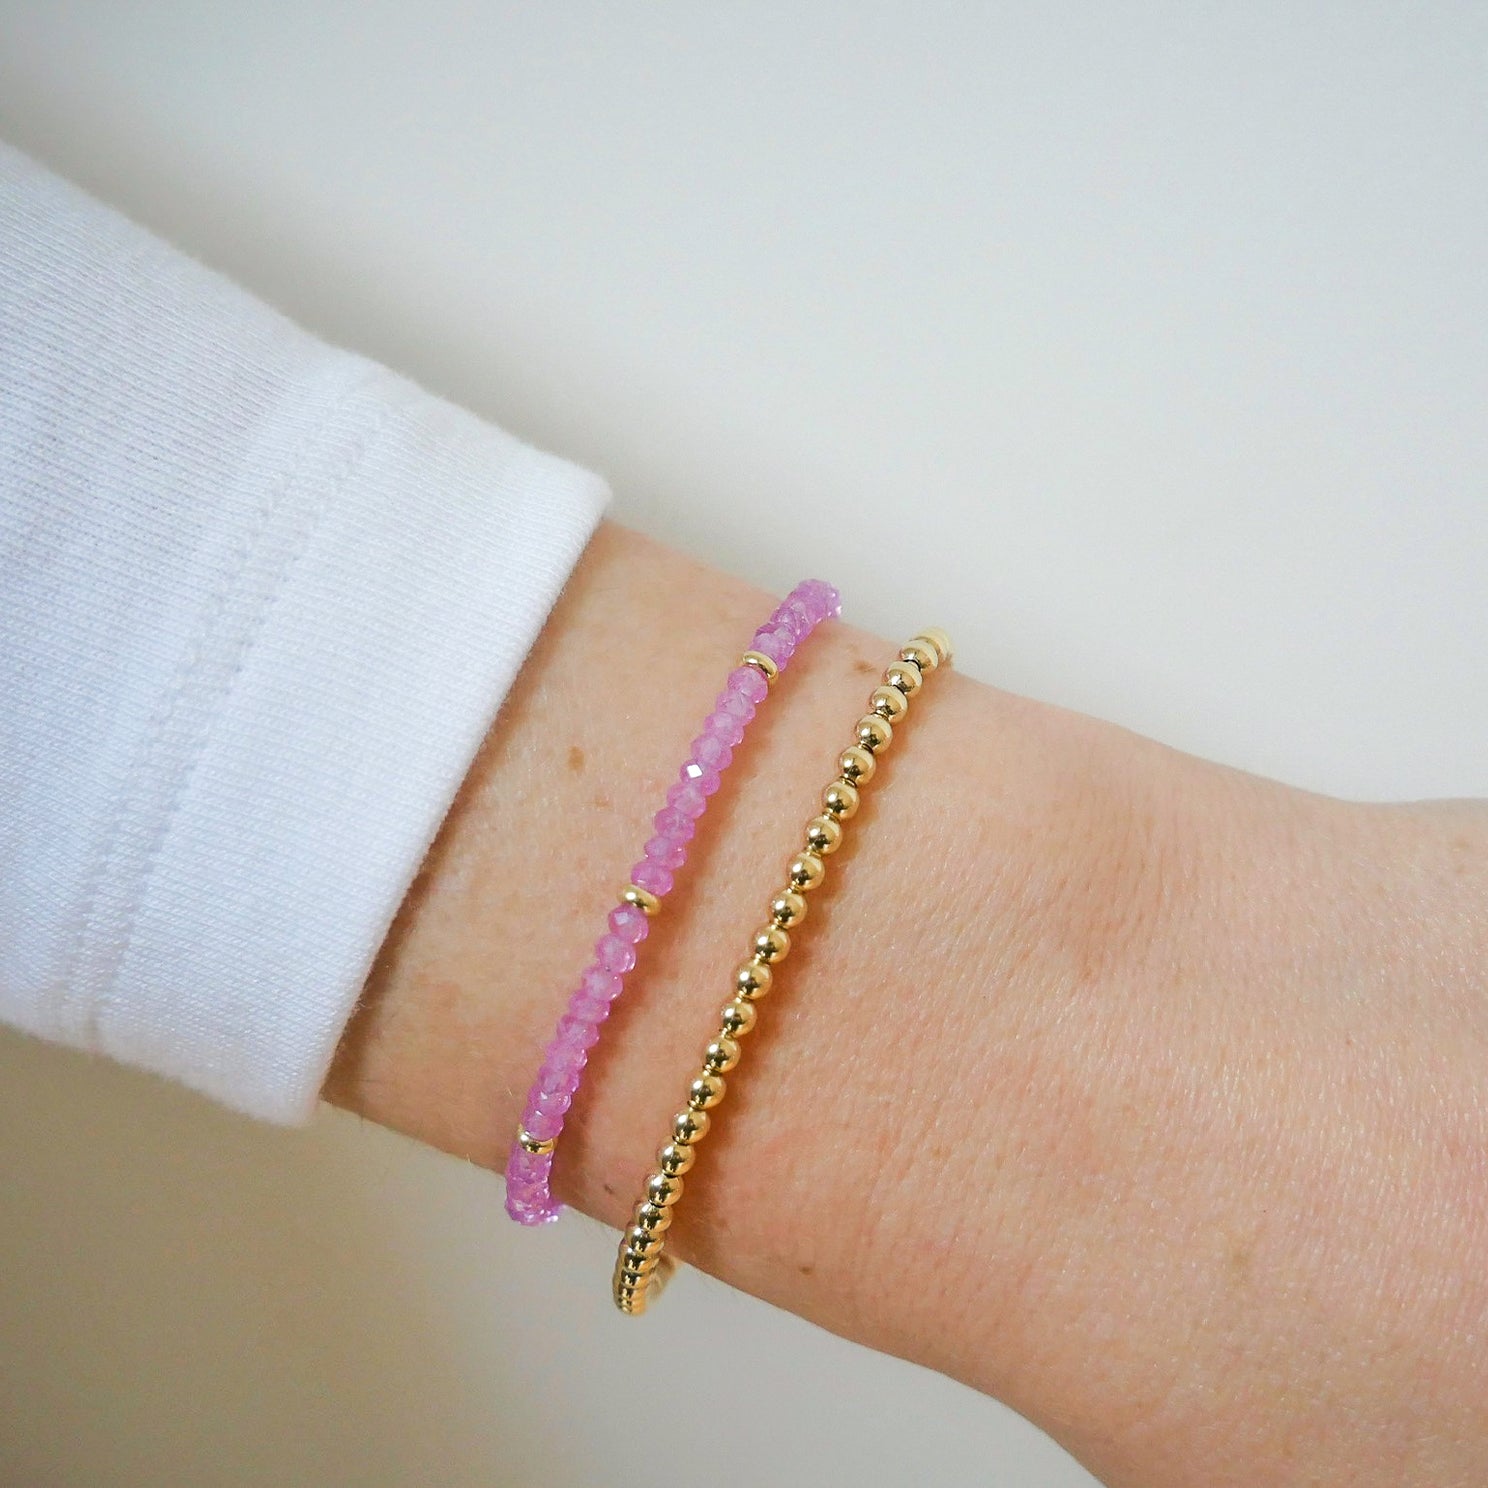 Birthstone Bead Bracelet in Pink Sapphire next to gold ball stretch bracelet styled on wrist of model wearing white sleeve